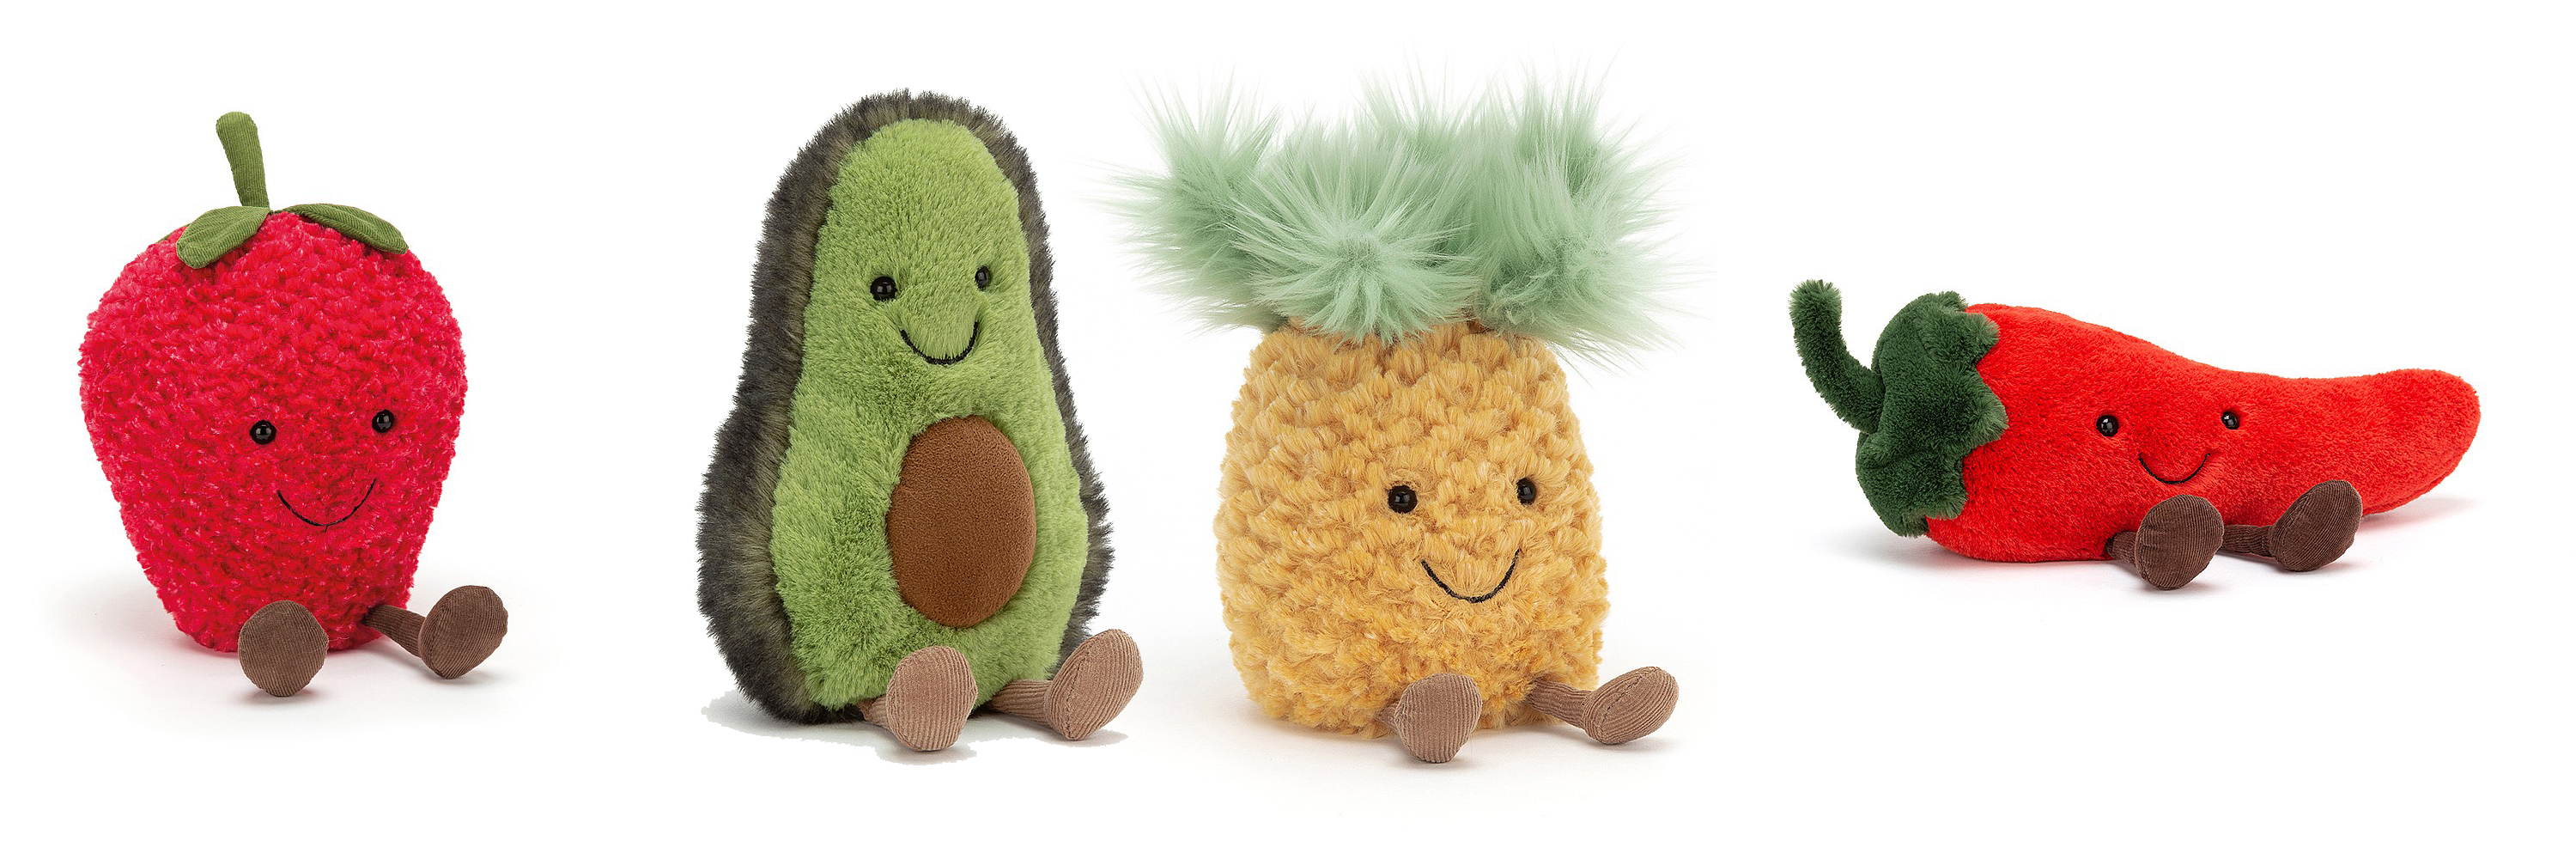 amuseable strawberry, pineapple, chilli and avocado by Jellycat.